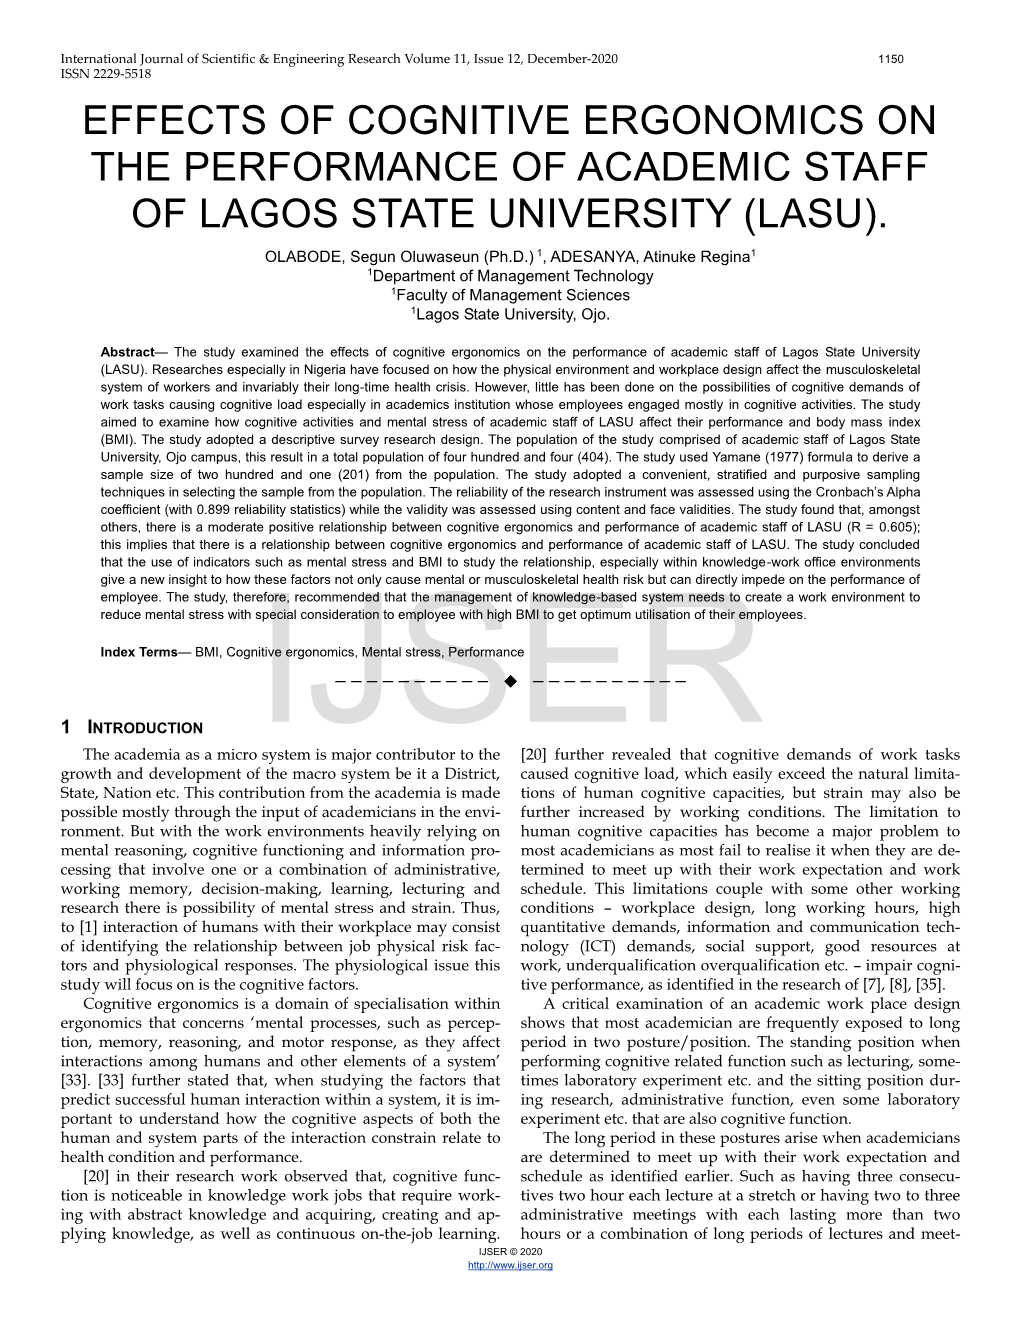 Effects of Cognitive Ergonomics on the Performance of Academic Staff of Lagos State University (Lasu)